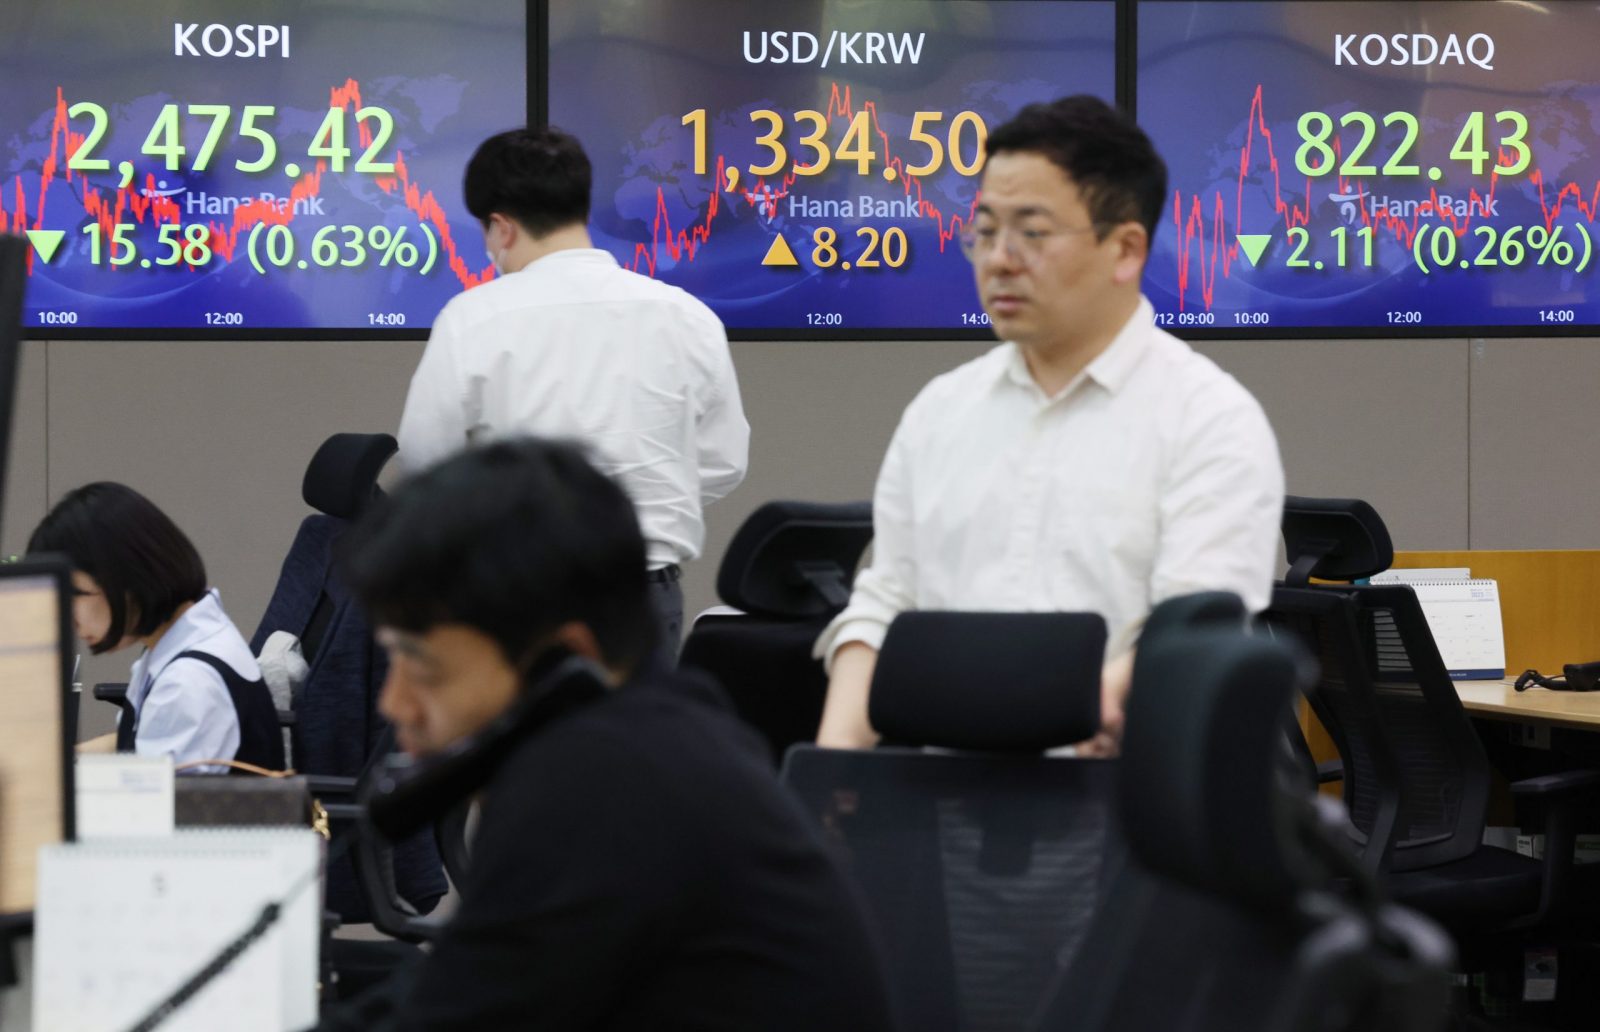 epa10622225 An electronic signboard in the dealing room of Hana Bank shows the benchmark Korea Composite Stock Price Index (KOSPI) having fallen 15.58 points, or 0.63 percent, to close at 2,475.42, in Seoul, 12 May 2023. Seoul shares ended lower as investors remain concerned about the Federal Reserve taking further tightening steps.  EPA/YONHAP SOUTH KOREA OUT